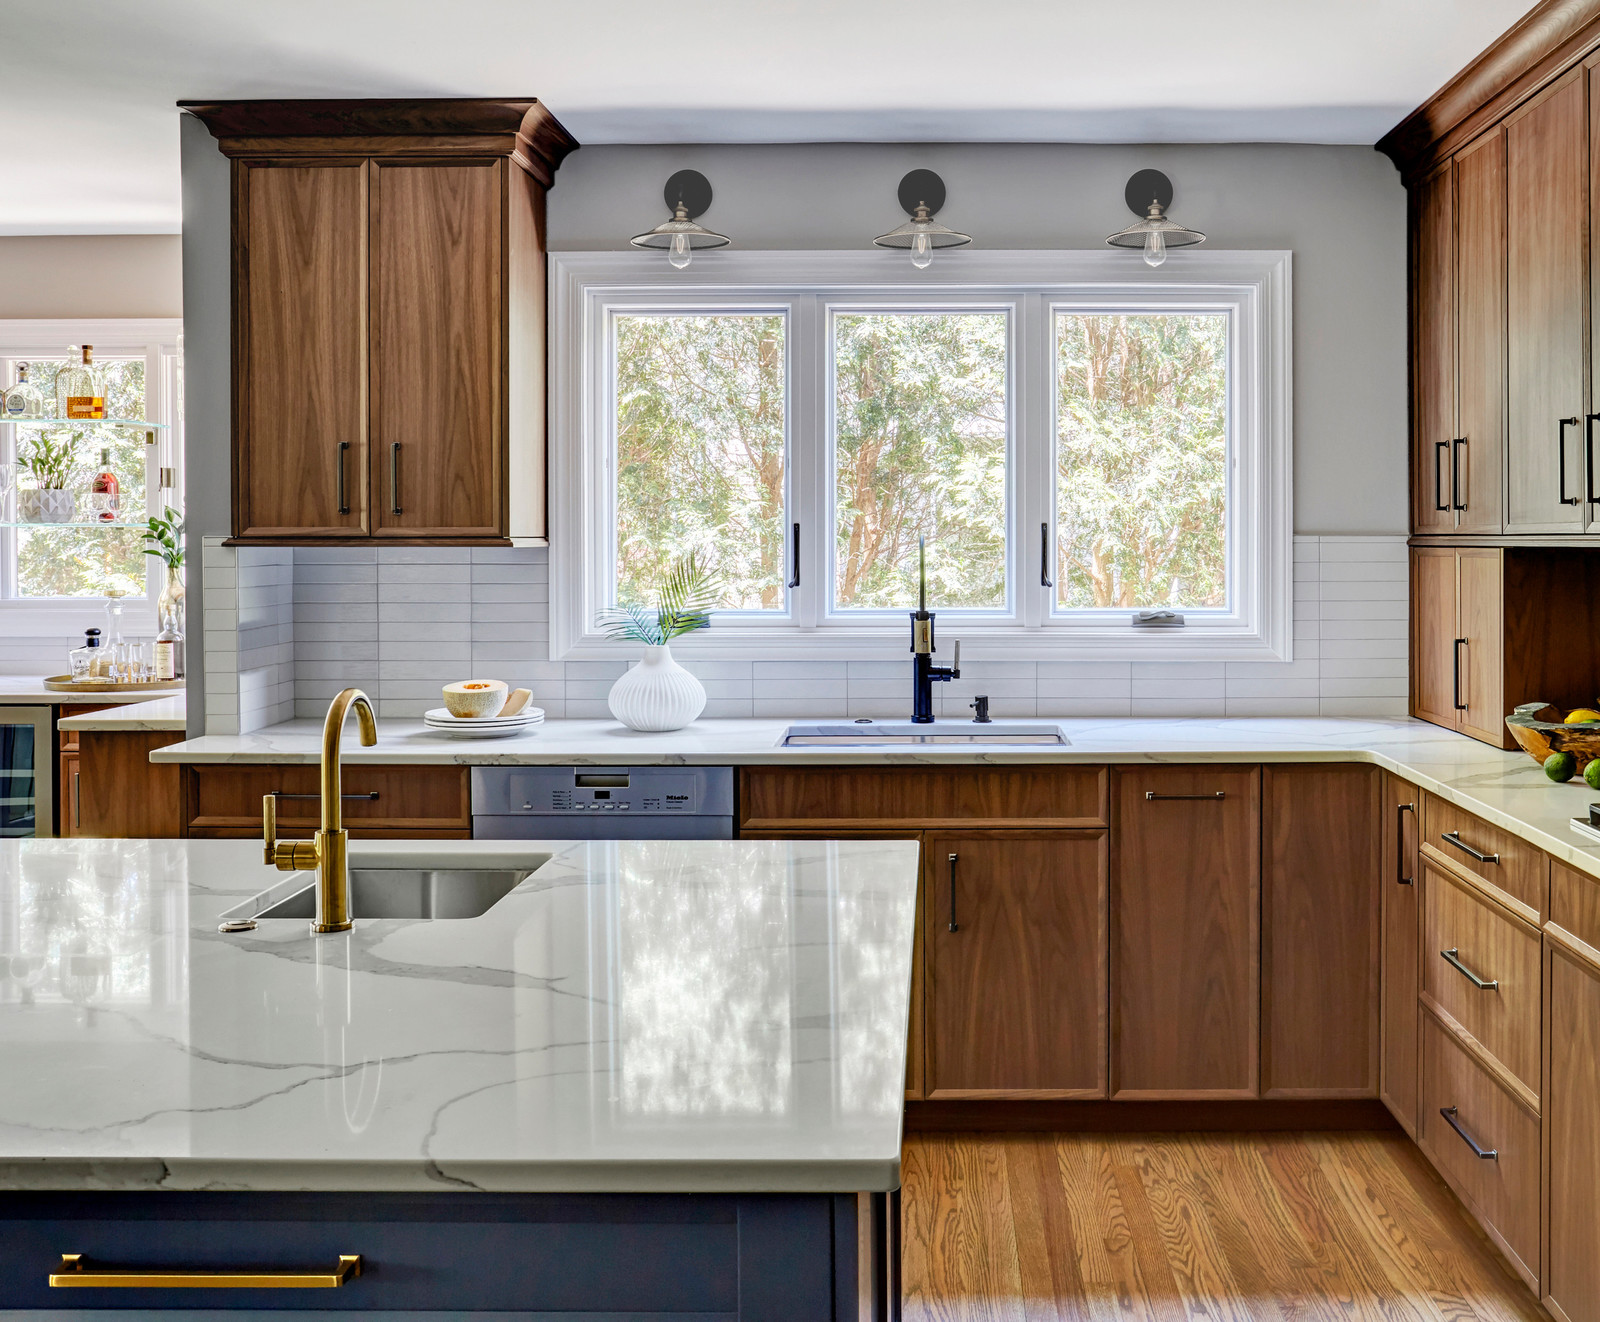 Transitional L Shaped Kitchen With An Undermount Sink And Casement Windows Over 